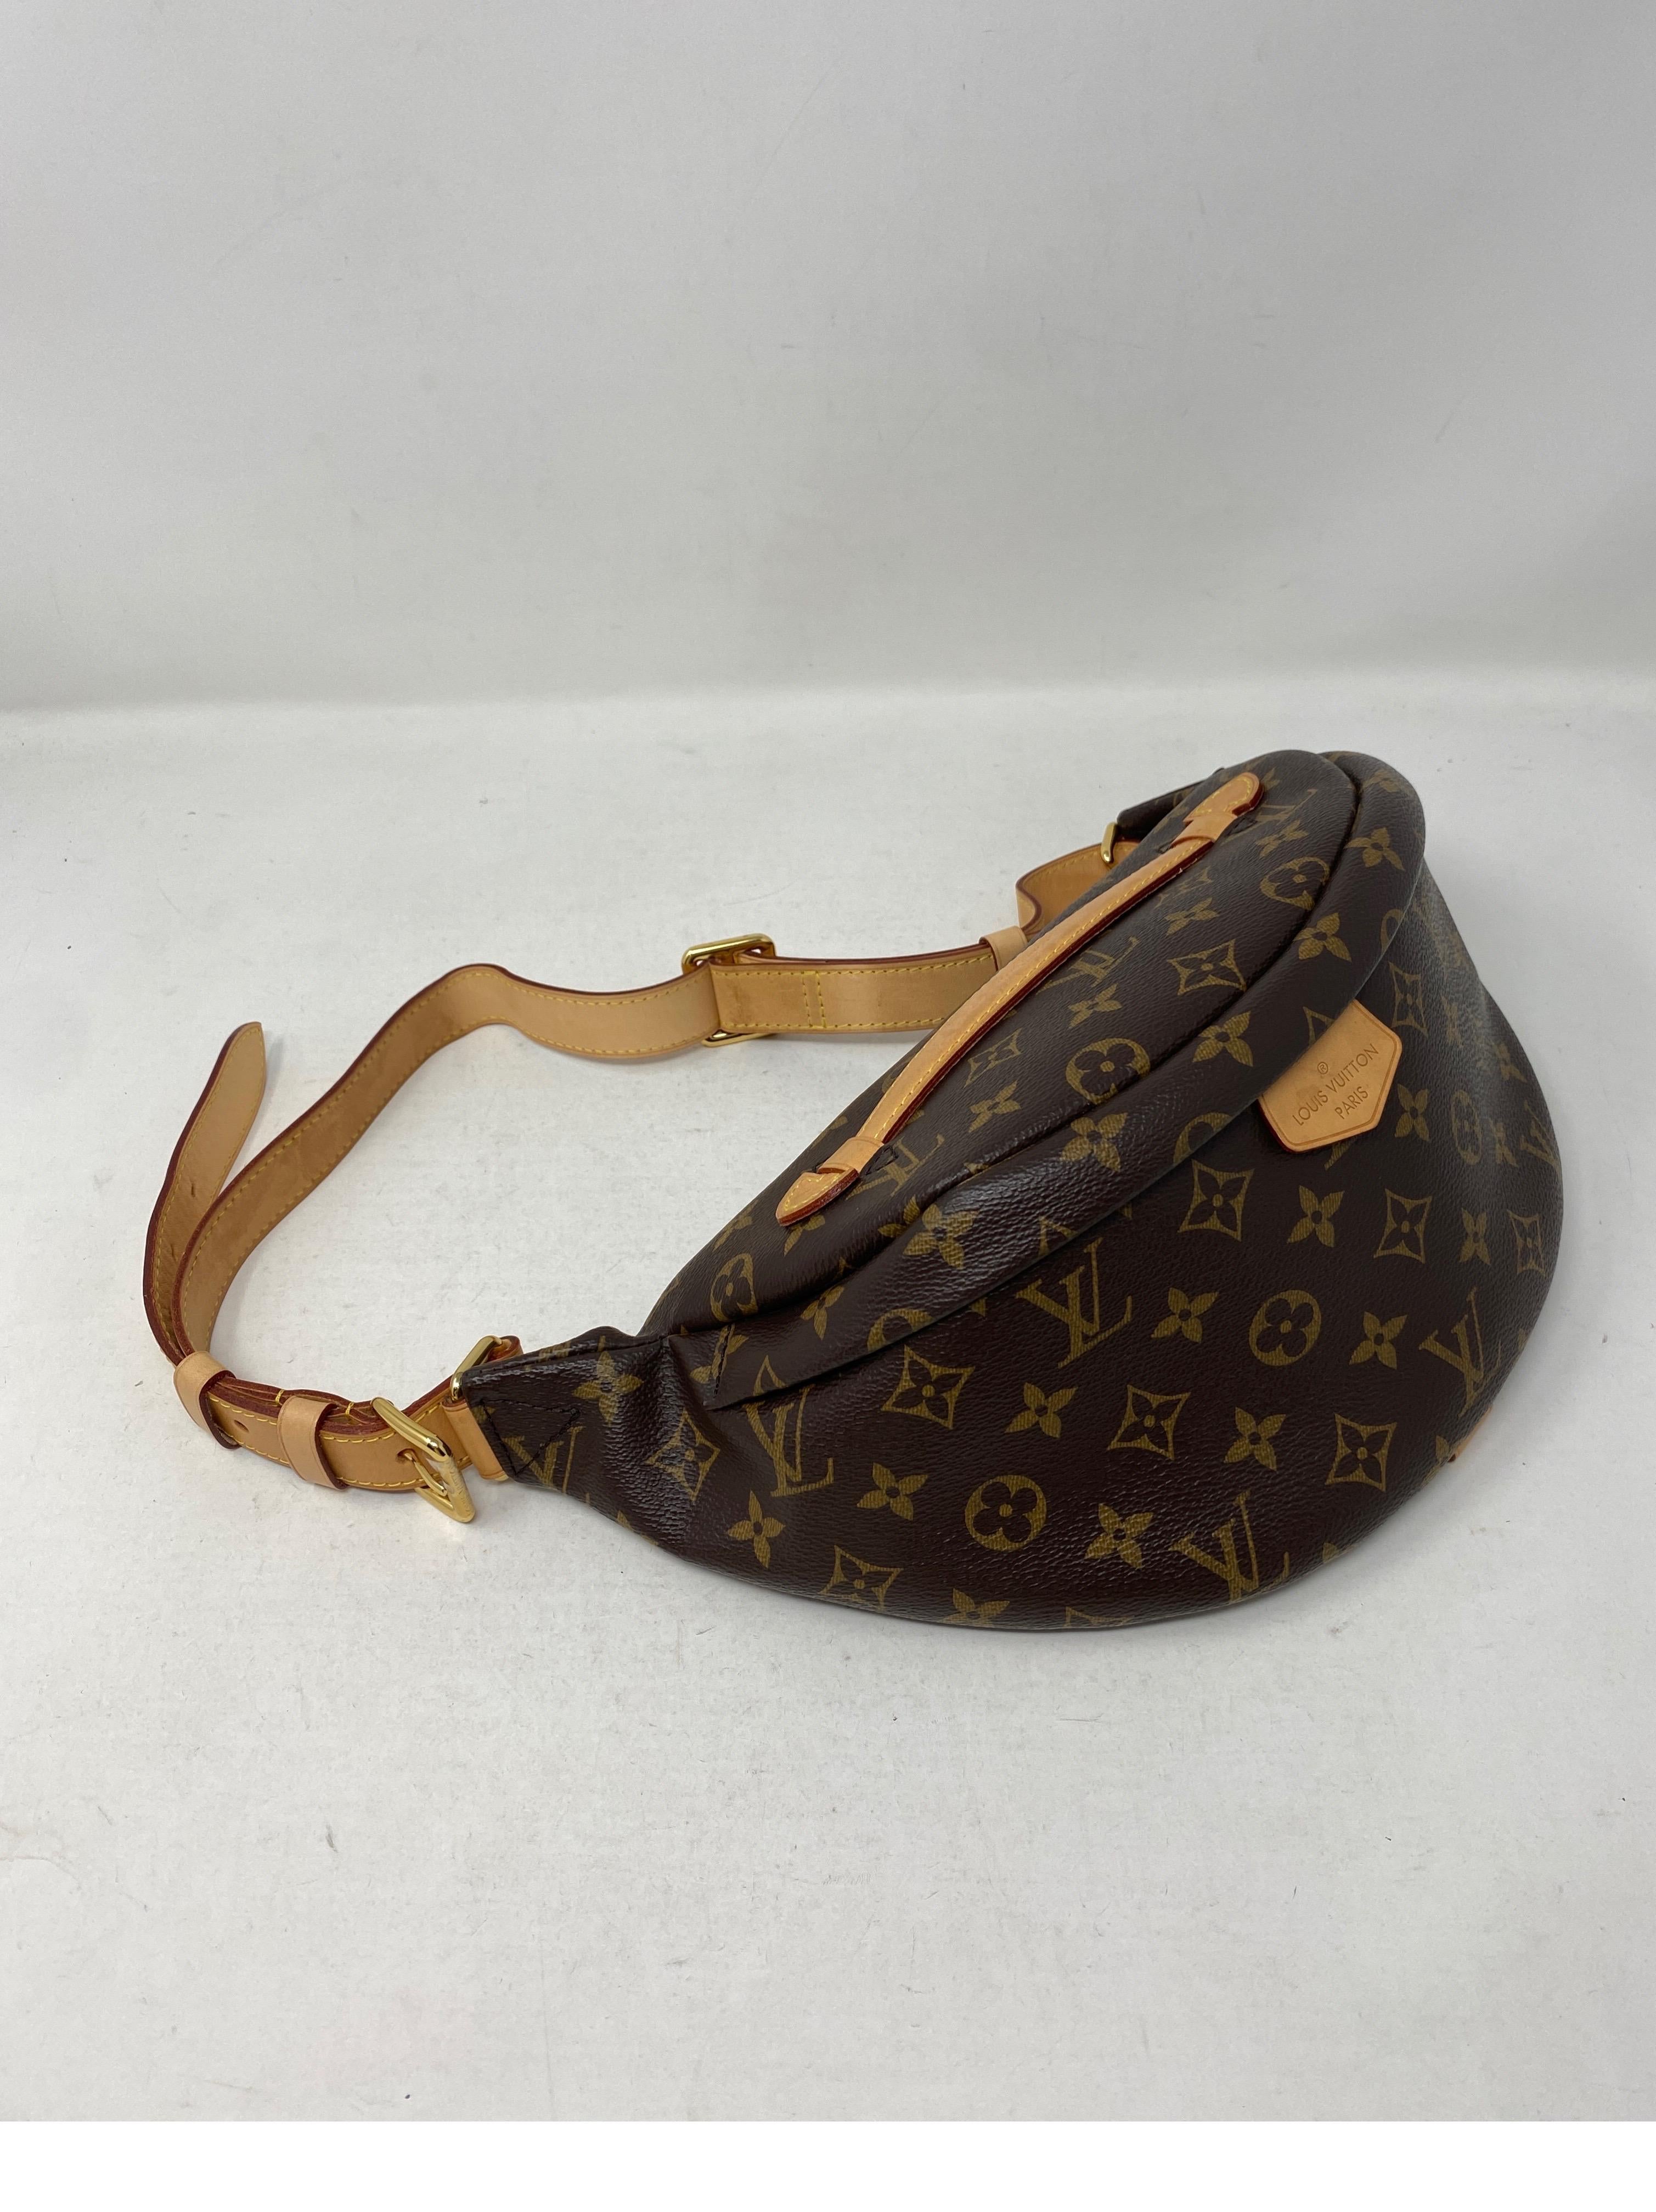 Louic Vuitton Bum Bag. Monogram coated canvas. Good condition. Interior clean. Hard to find belt bag. Can be worn crossbody too. Guaranteed authentic. 